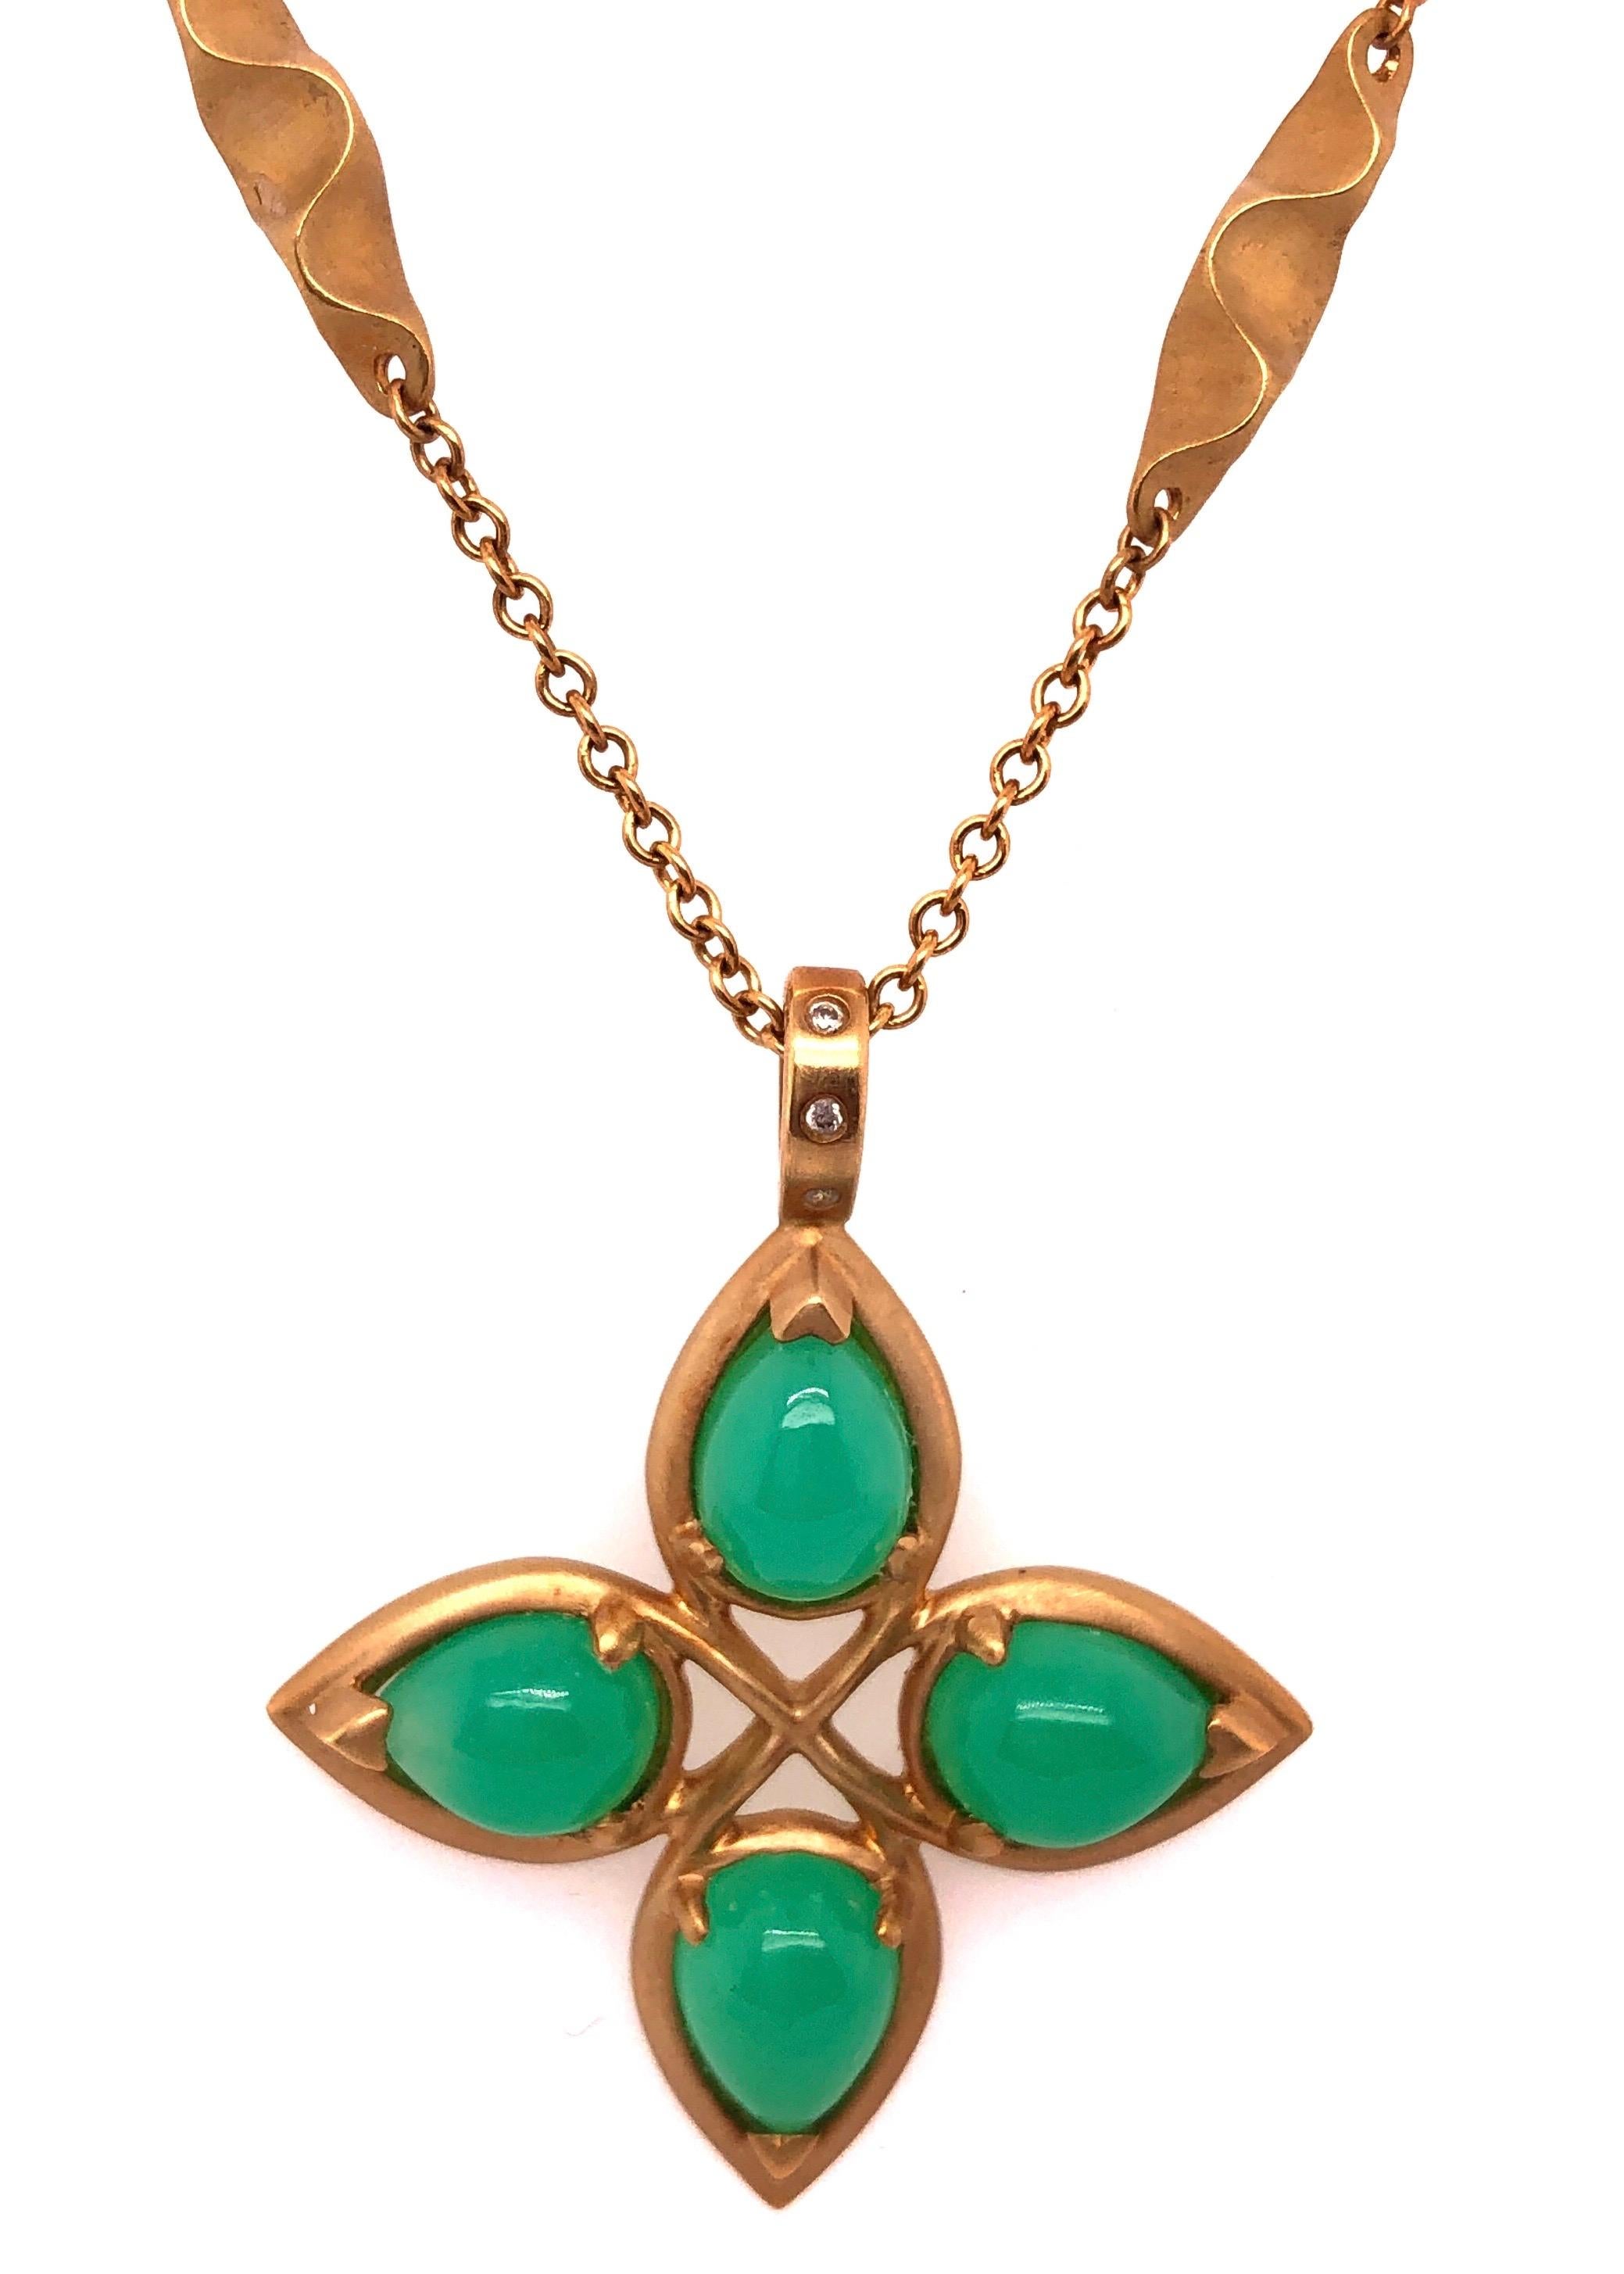 18 Karat Yellow Gold Caleo Chrysoprase Pendant Necklace In Good Condition For Sale In Stamford, CT